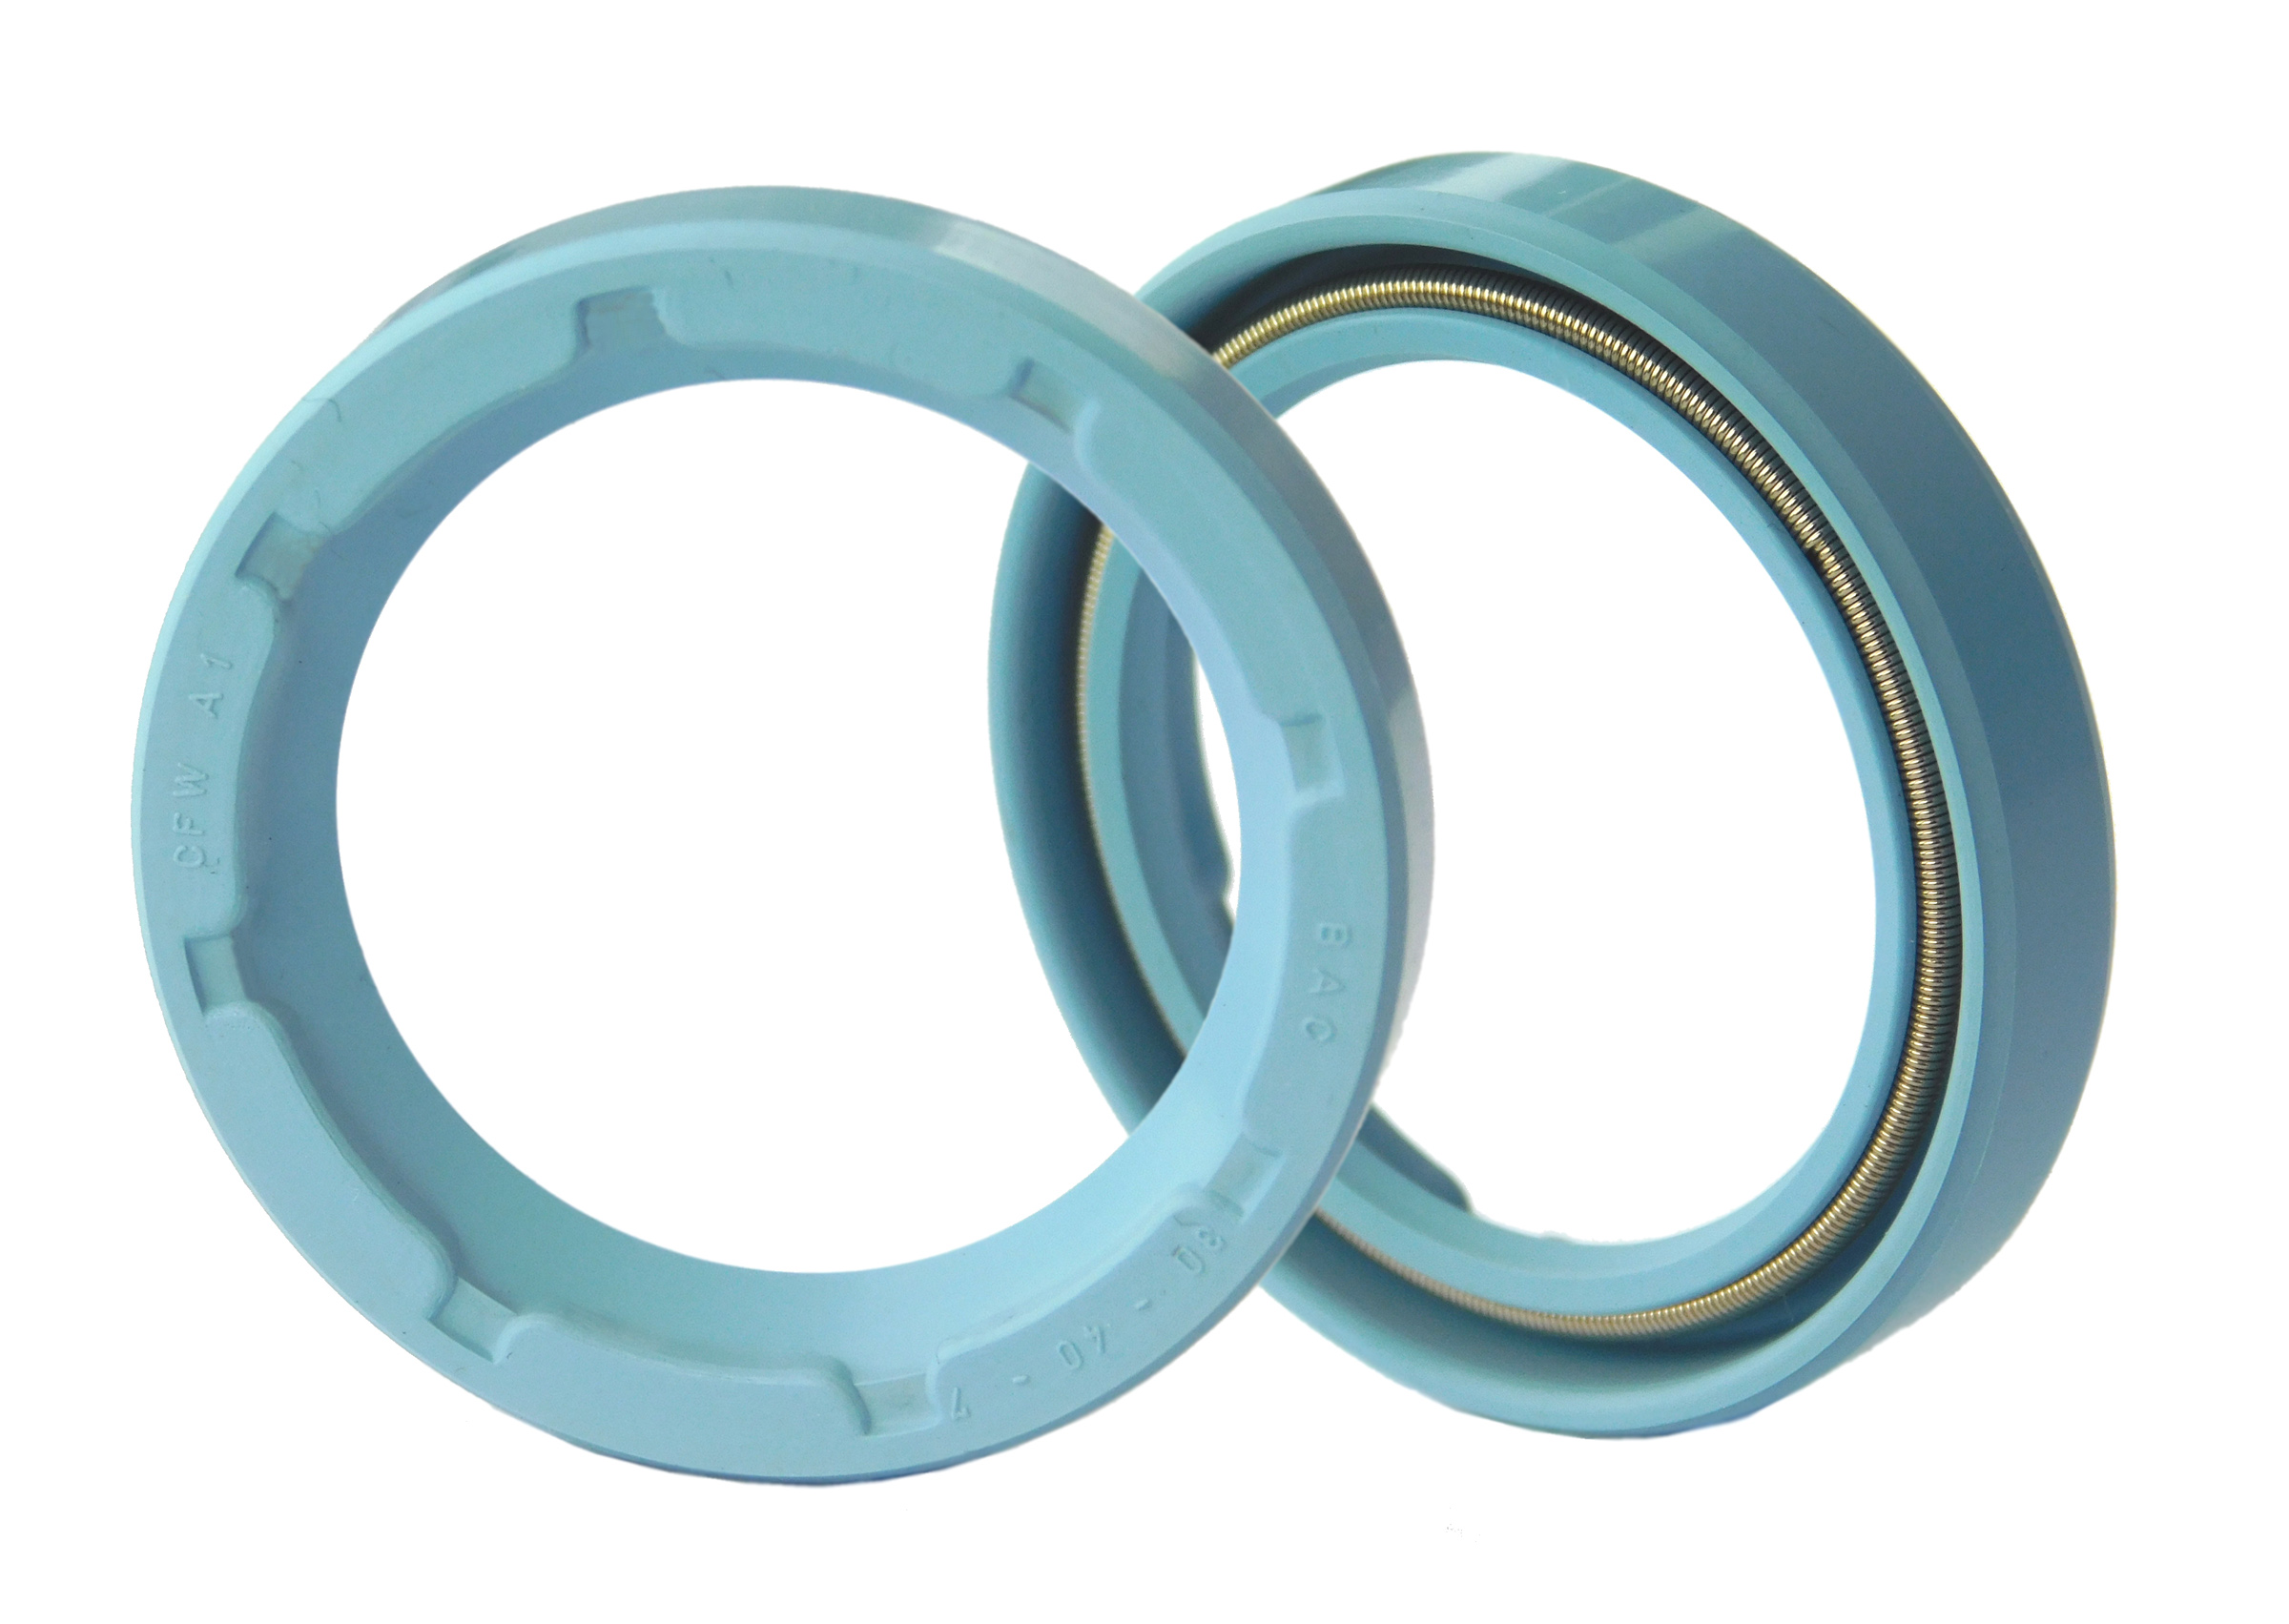 Simmerring seals are now available in two new materials, making them suitable for food industry applications.